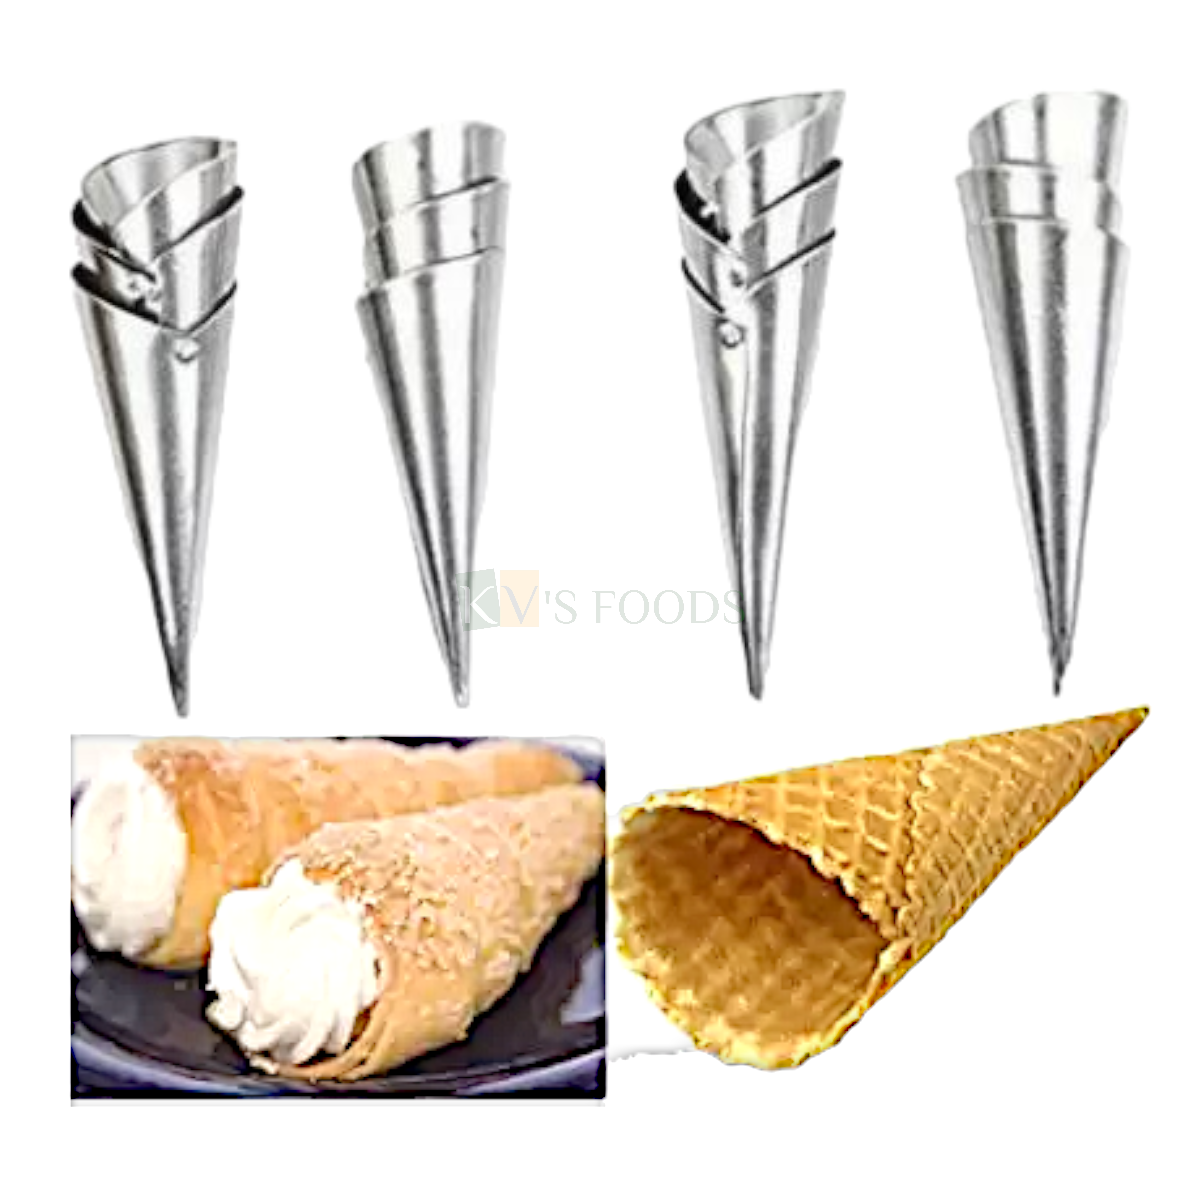 12PC Aluminium Cream Horn Non-Stick Mould Tin-Plated Steel Cream Conical Spiral Baking Cone For Making Roll Horn Popsicles French Horn Small Ice Cream Waffle Cone, Cream Rolls DIY Cake Decorations